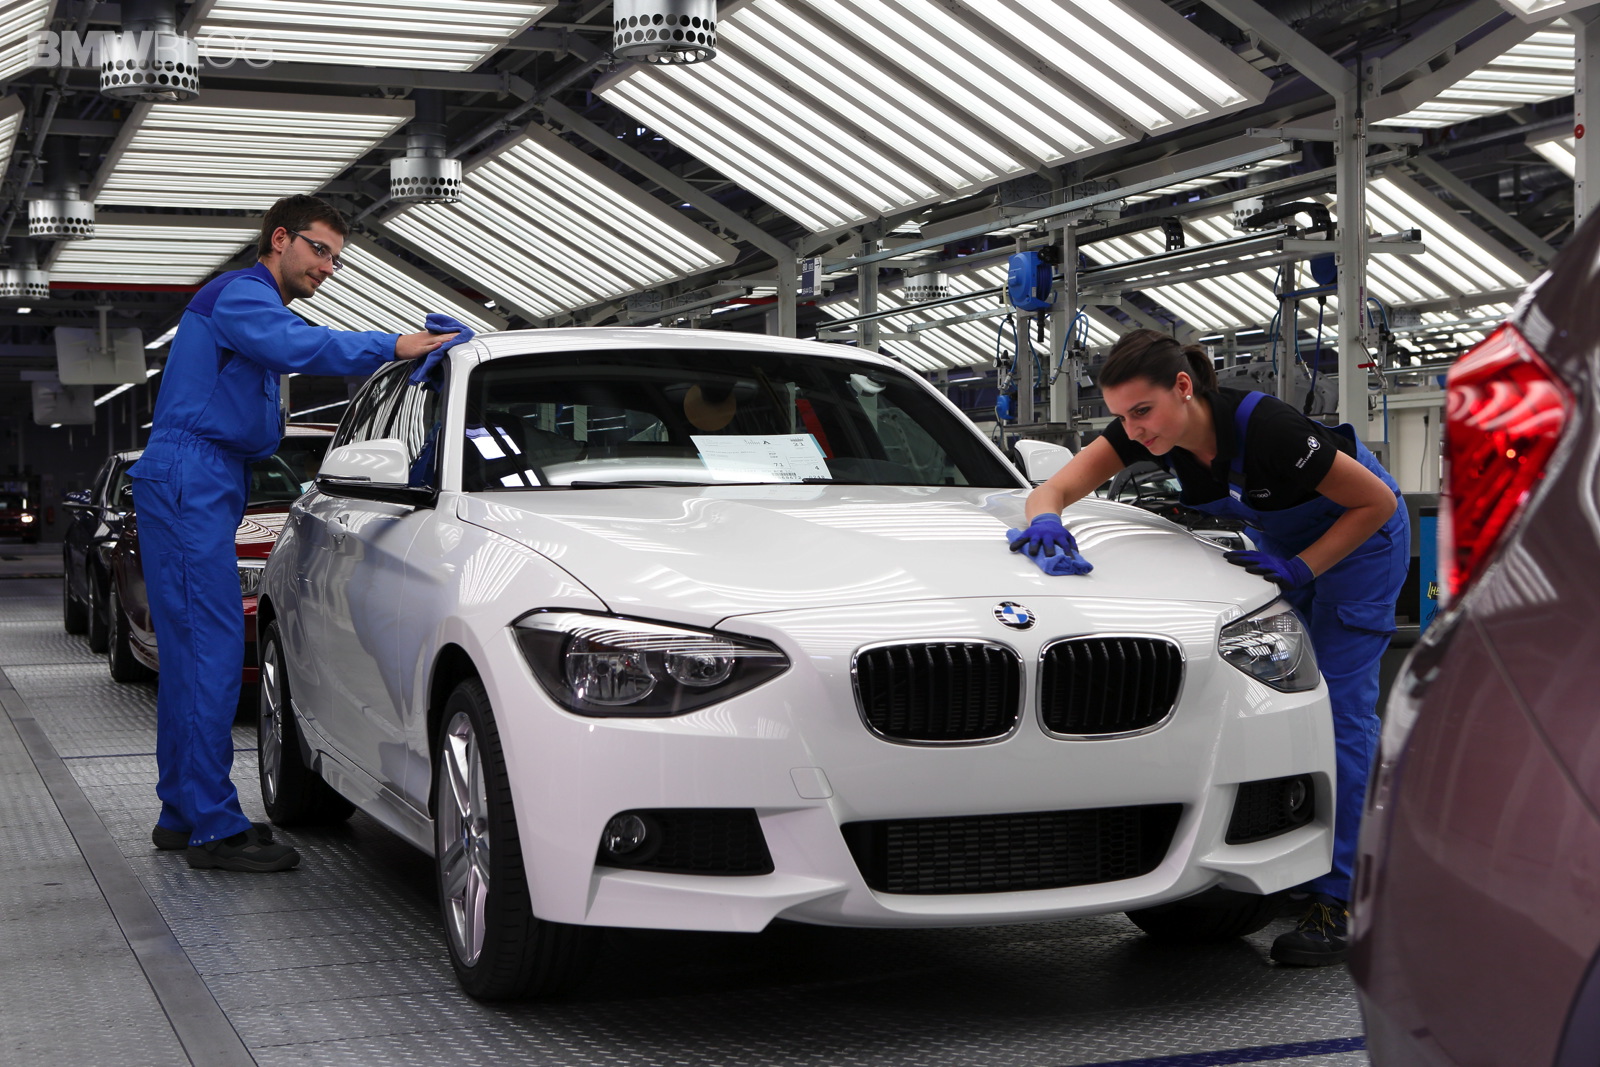 Bmw 1 series production video #6